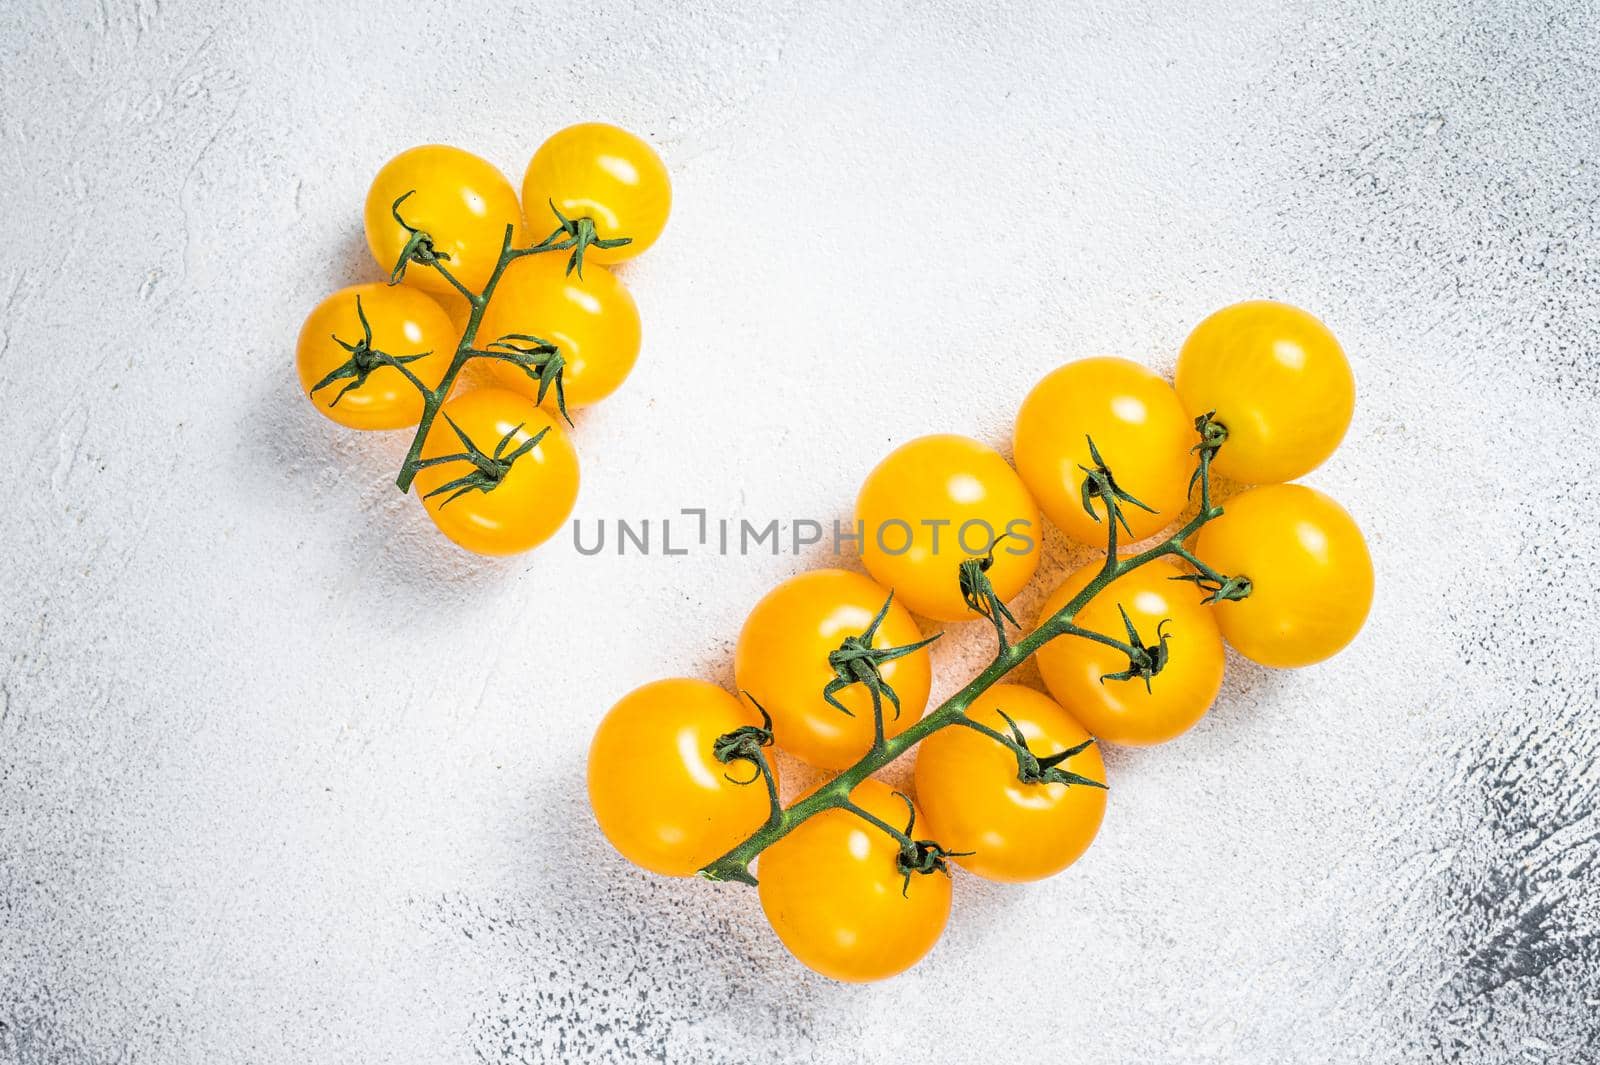 Small yellow cherry tomato on a kitchen table. White background. Top view by Composter